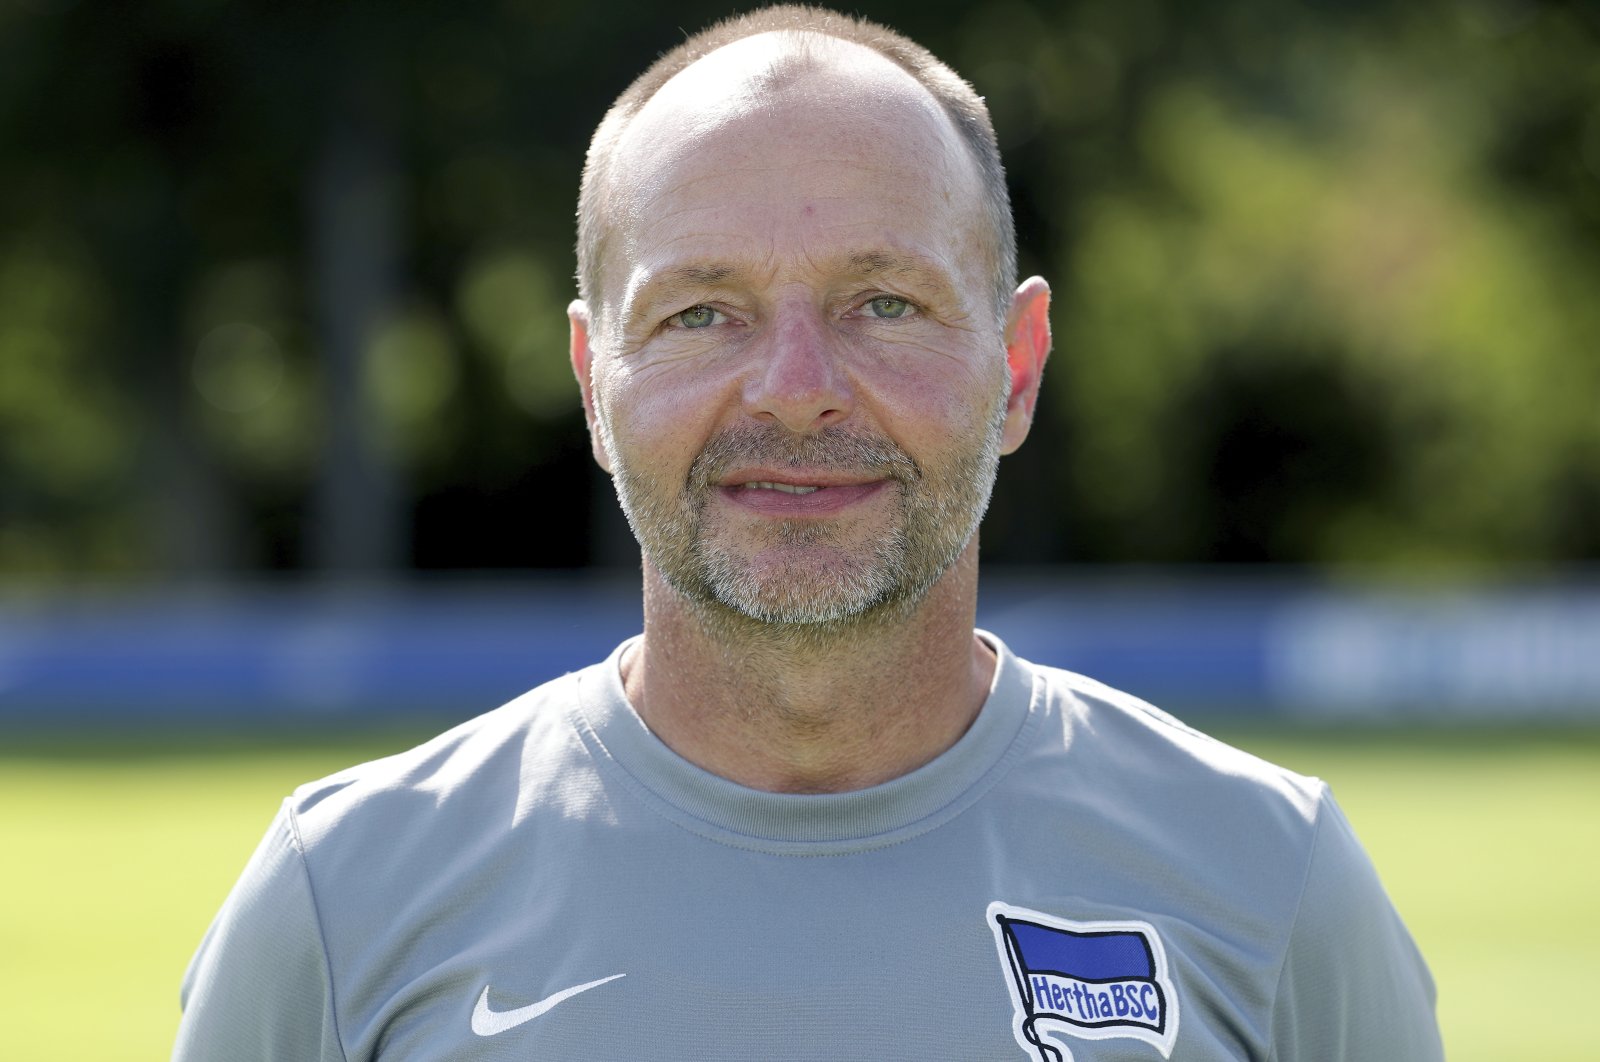 Hertha's Zsolt Petry poses for a photo during the 2020/21 team presentation of the German first division, Bundesliga, in Berlin, Germany, Aug. 17, 2020. (AP Photo)